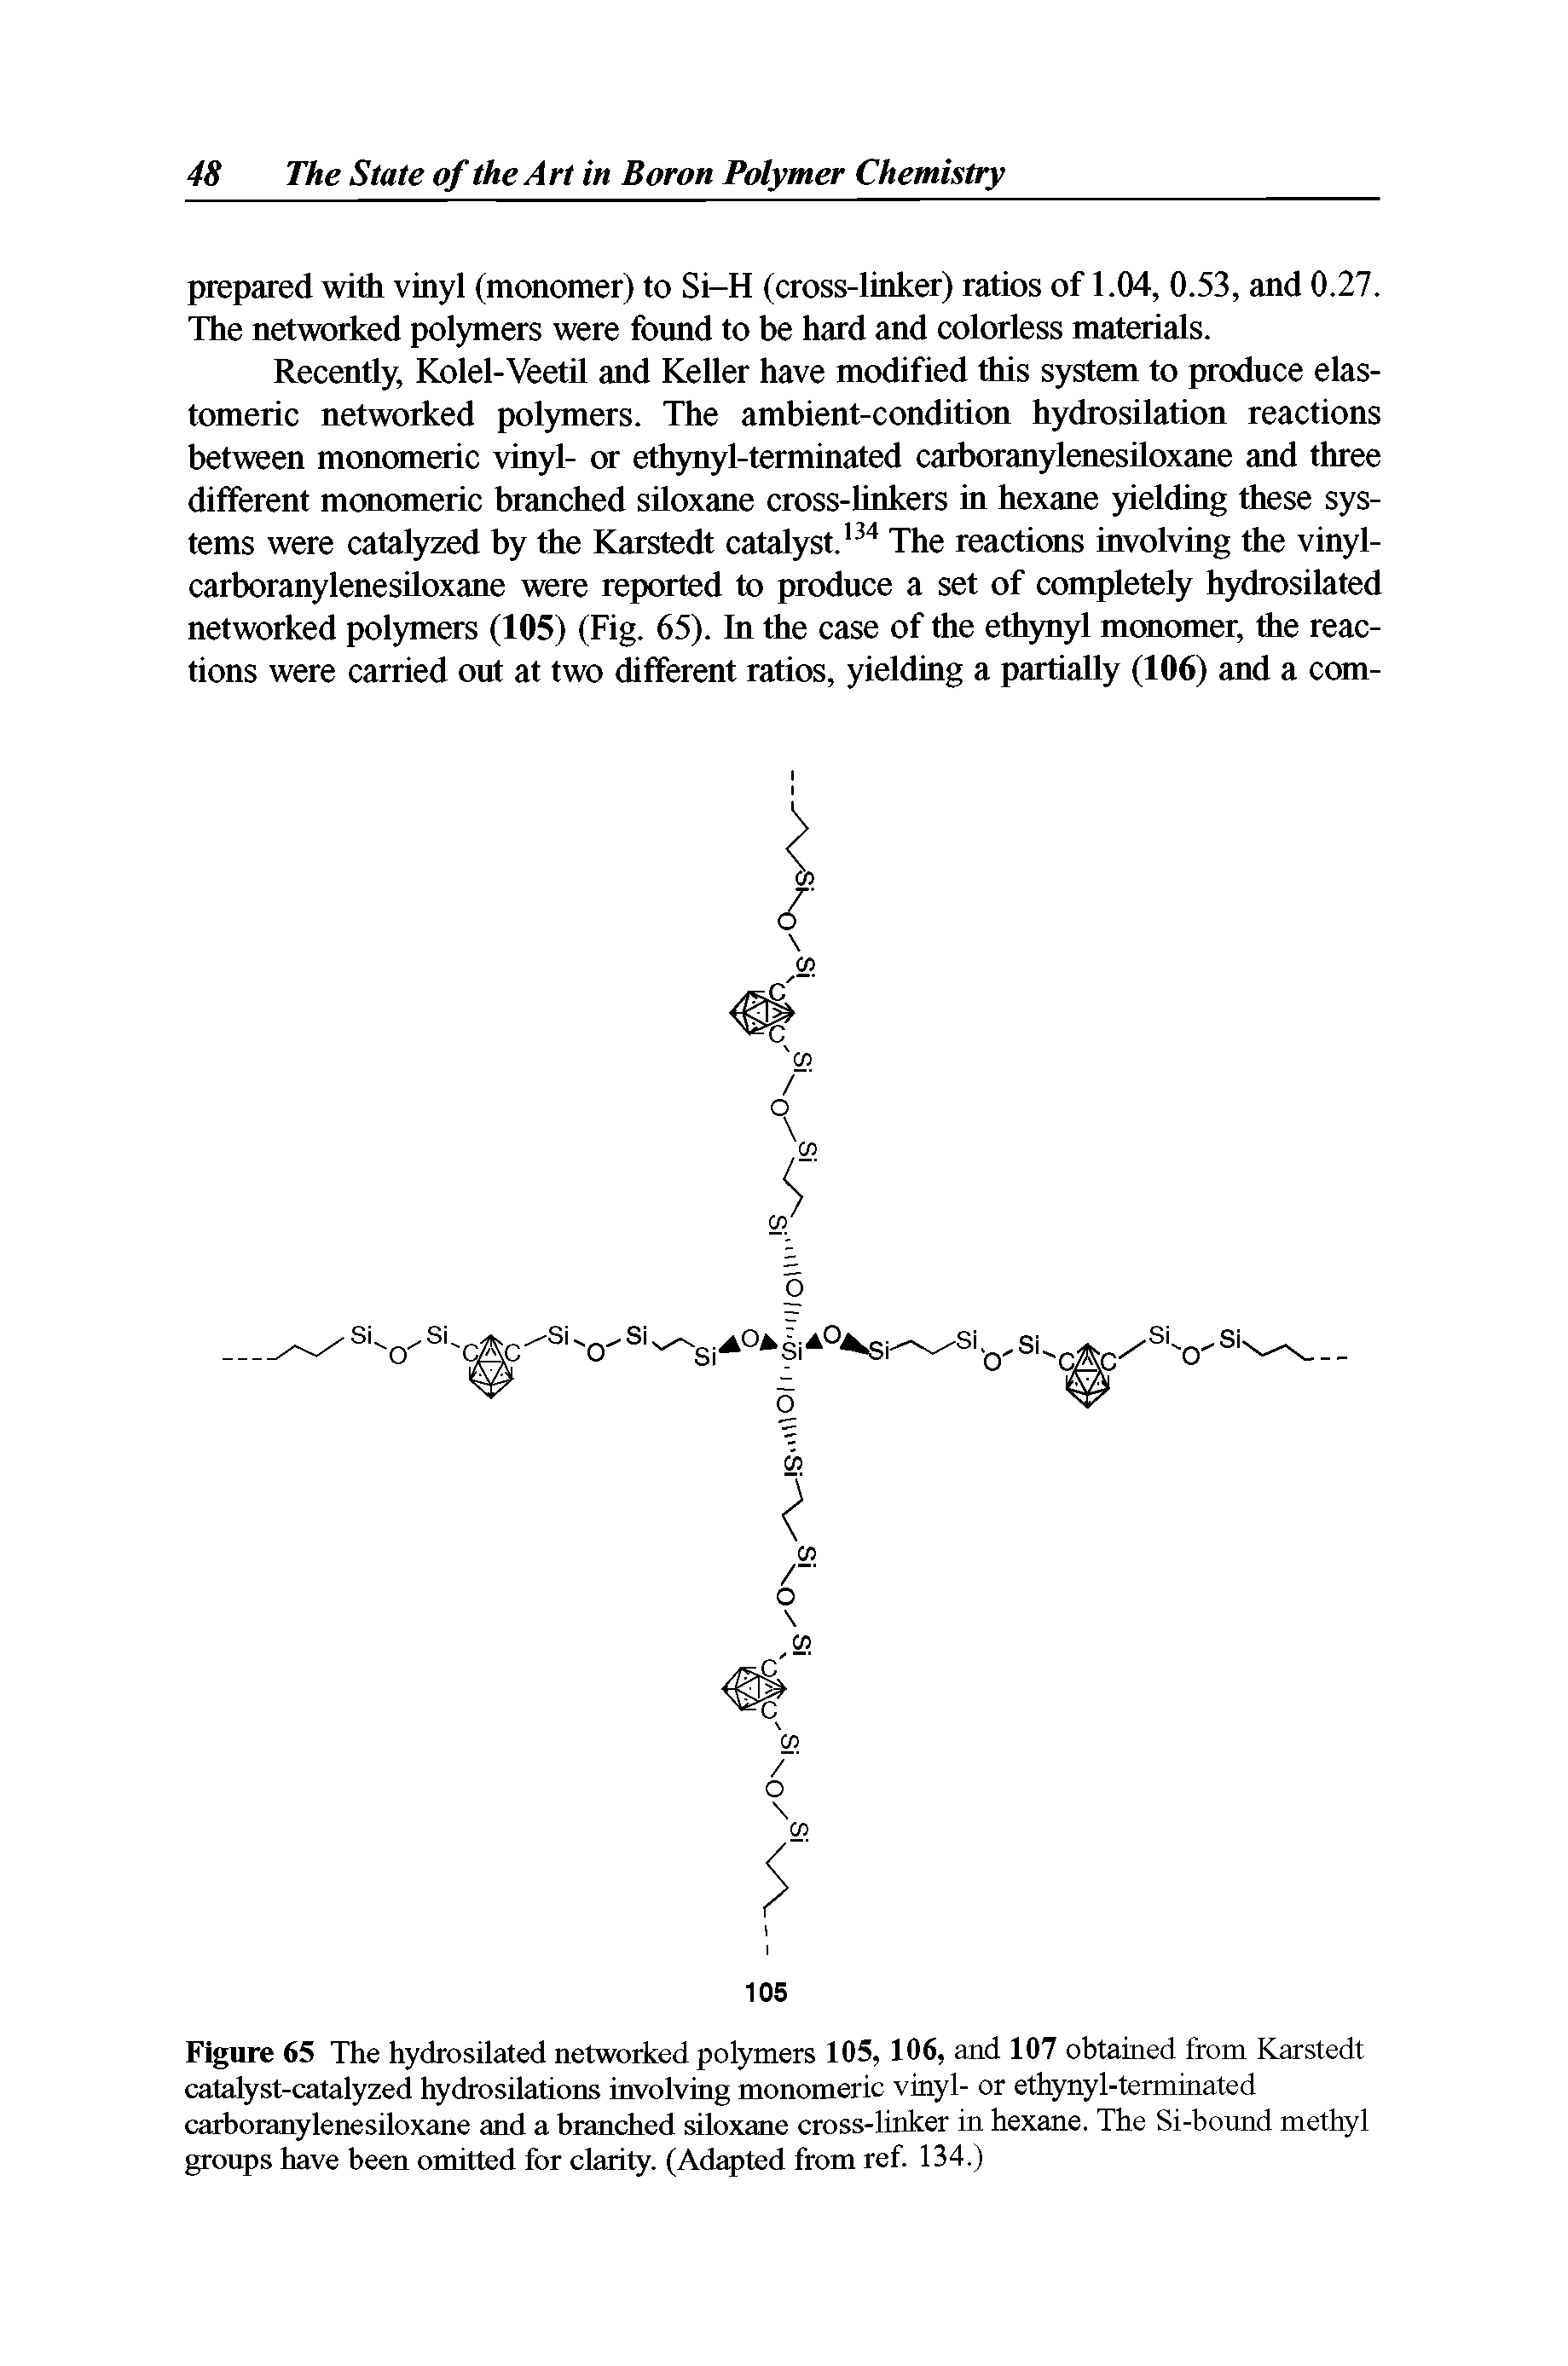 Figure 65 The hydrosilated networked polymers 105, 106, and 107 obtained from Karstedt catalyst-catalyzed hydrosilations involving monomeric vinyl- or ethynyl-terminated carboranylenesiloxane and a branched siloxane cross-linker in hexane. The Si-bound methyl groups have been omitted for clarity. (Adapted from ref. 134.)...